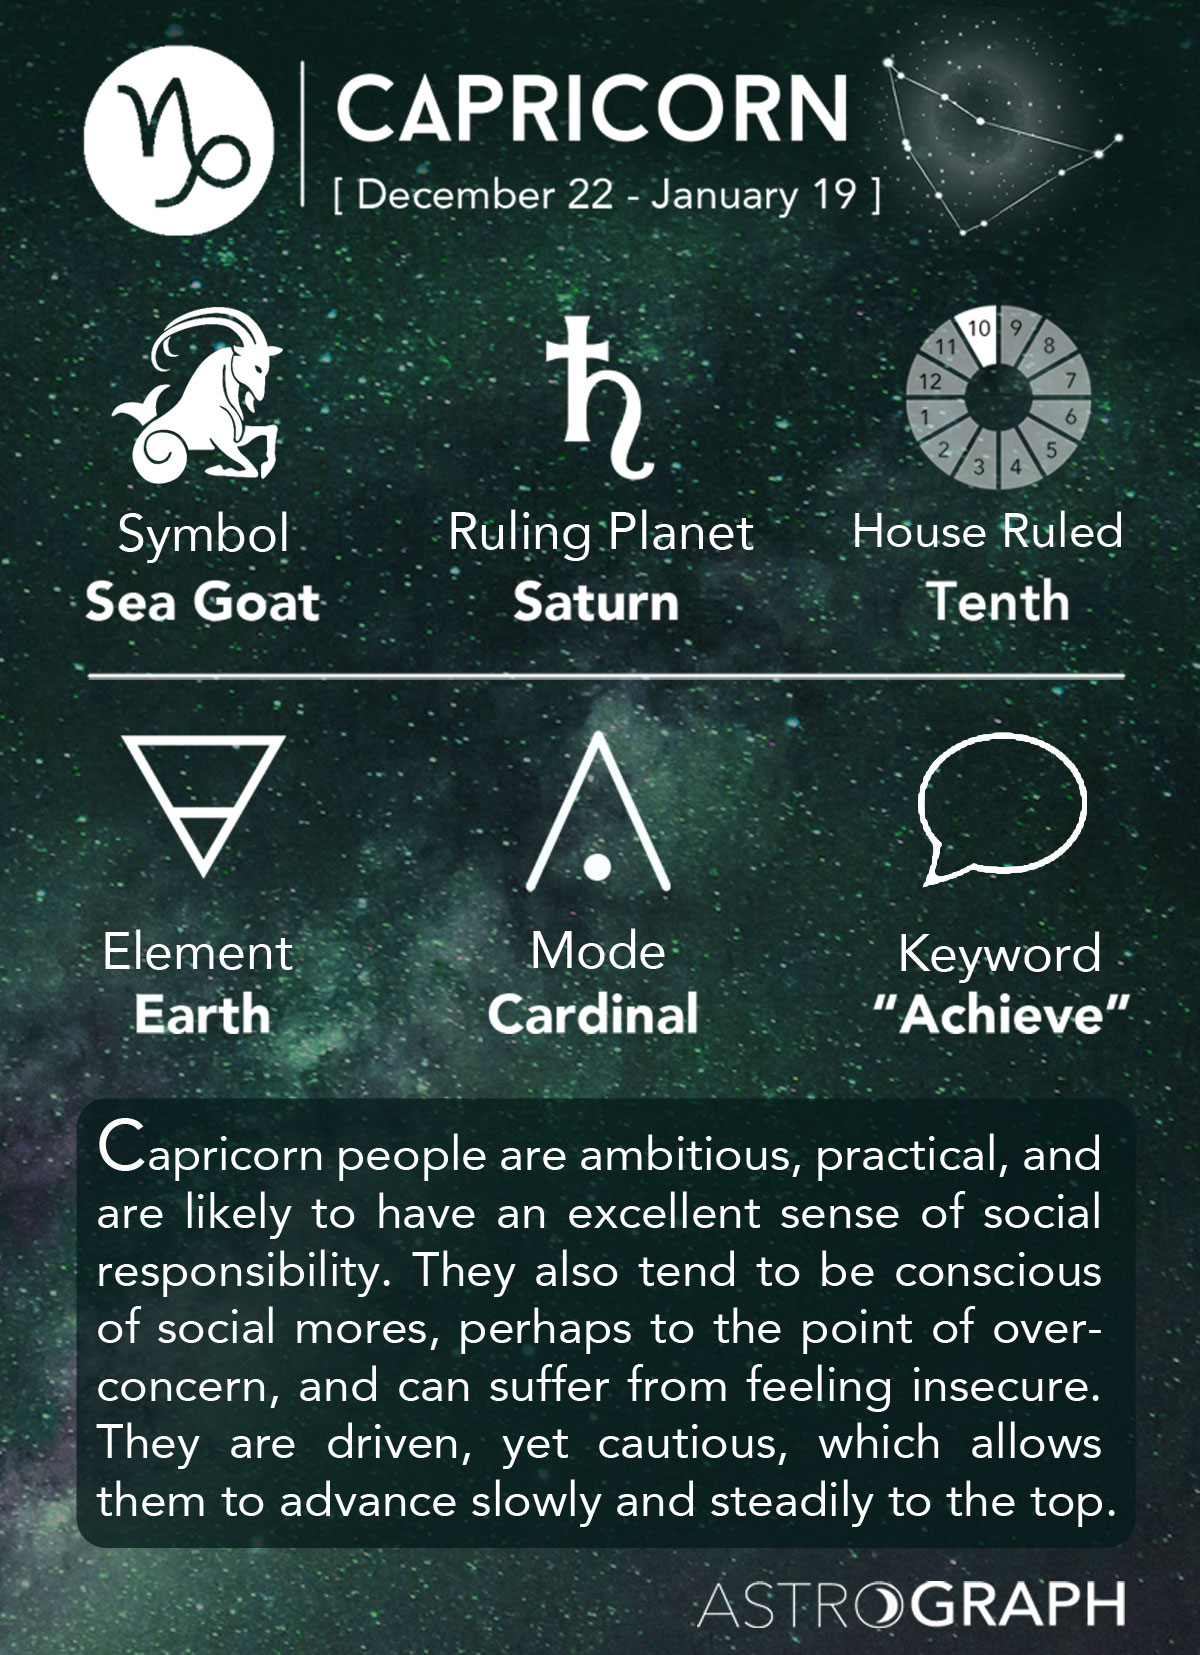 What are the three types of Capricorns?